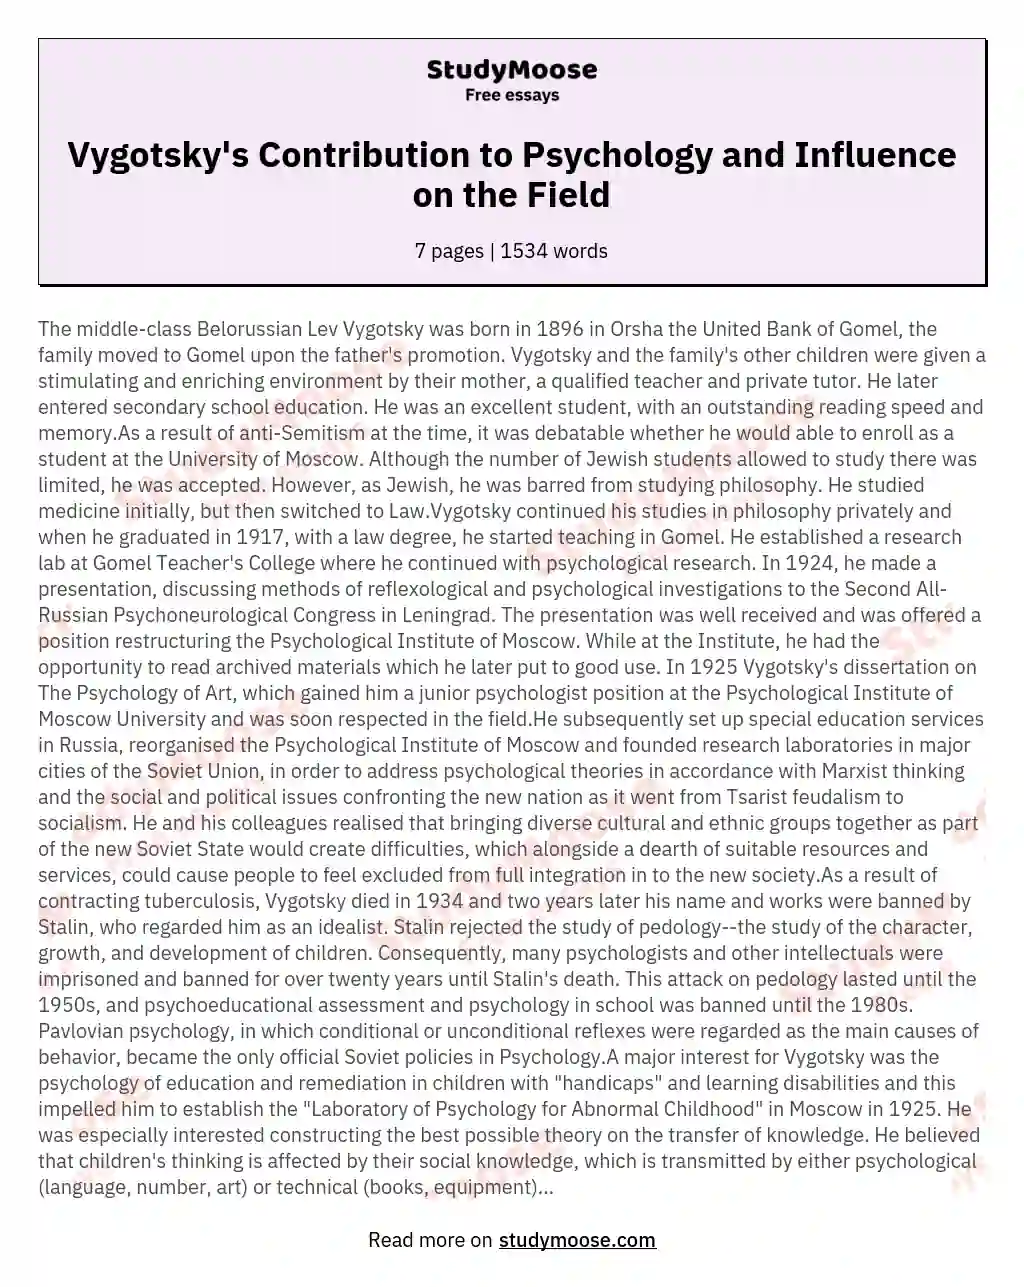 Outline the Contribution of Lev Semenovich Vygotsky in Psychology and Evaluate his Influence on the Field .